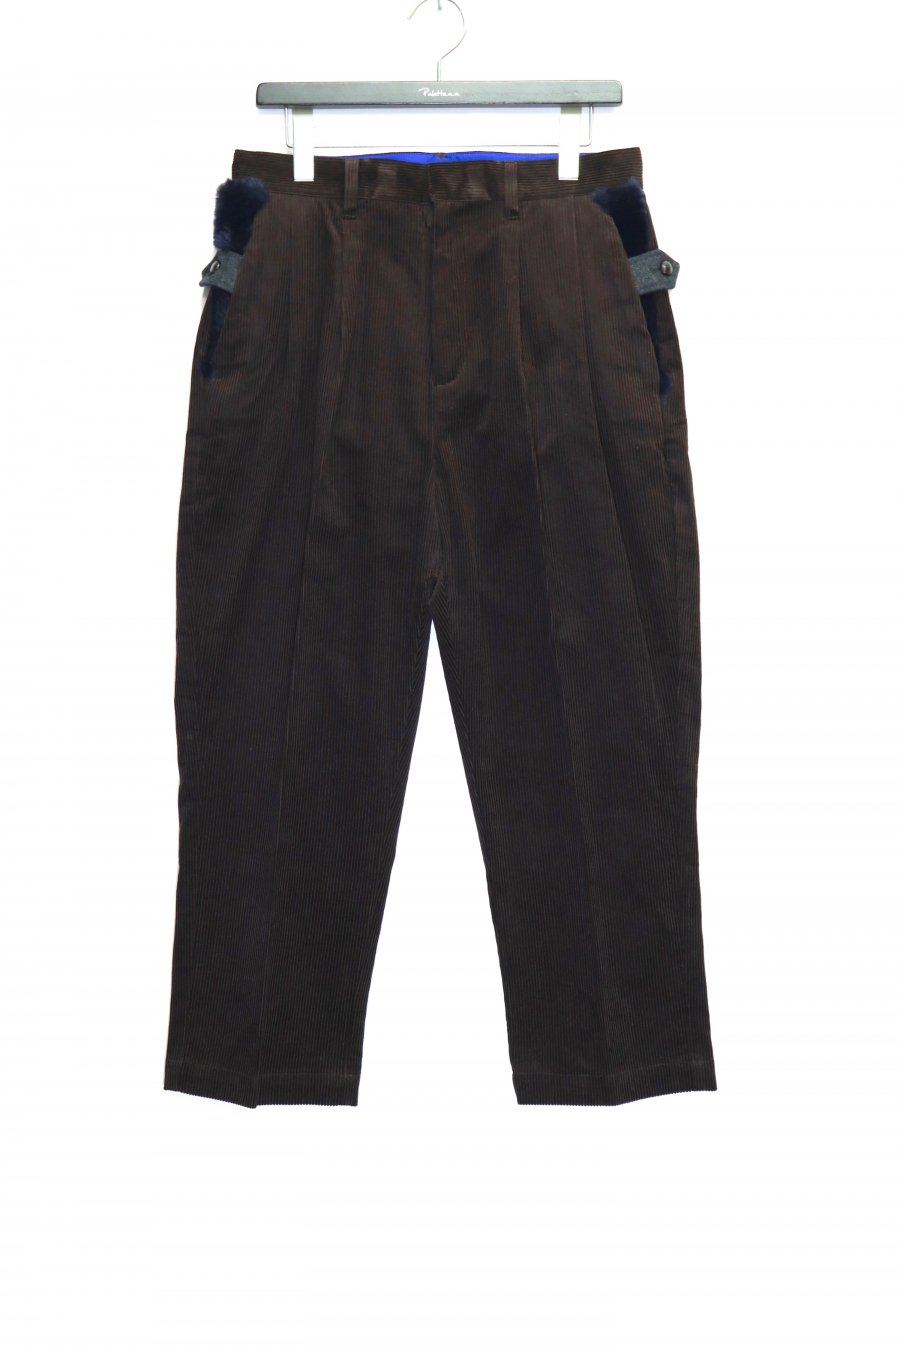 20%OFFelephant TRIBAL fabrics  Incomplete Length PantsBROWN<img class='new_mark_img2' src='https://img.shop-pro.jp/img/new/icons20.gif' style='border:none;display:inline;margin:0px;padding:0px;width:auto;' />